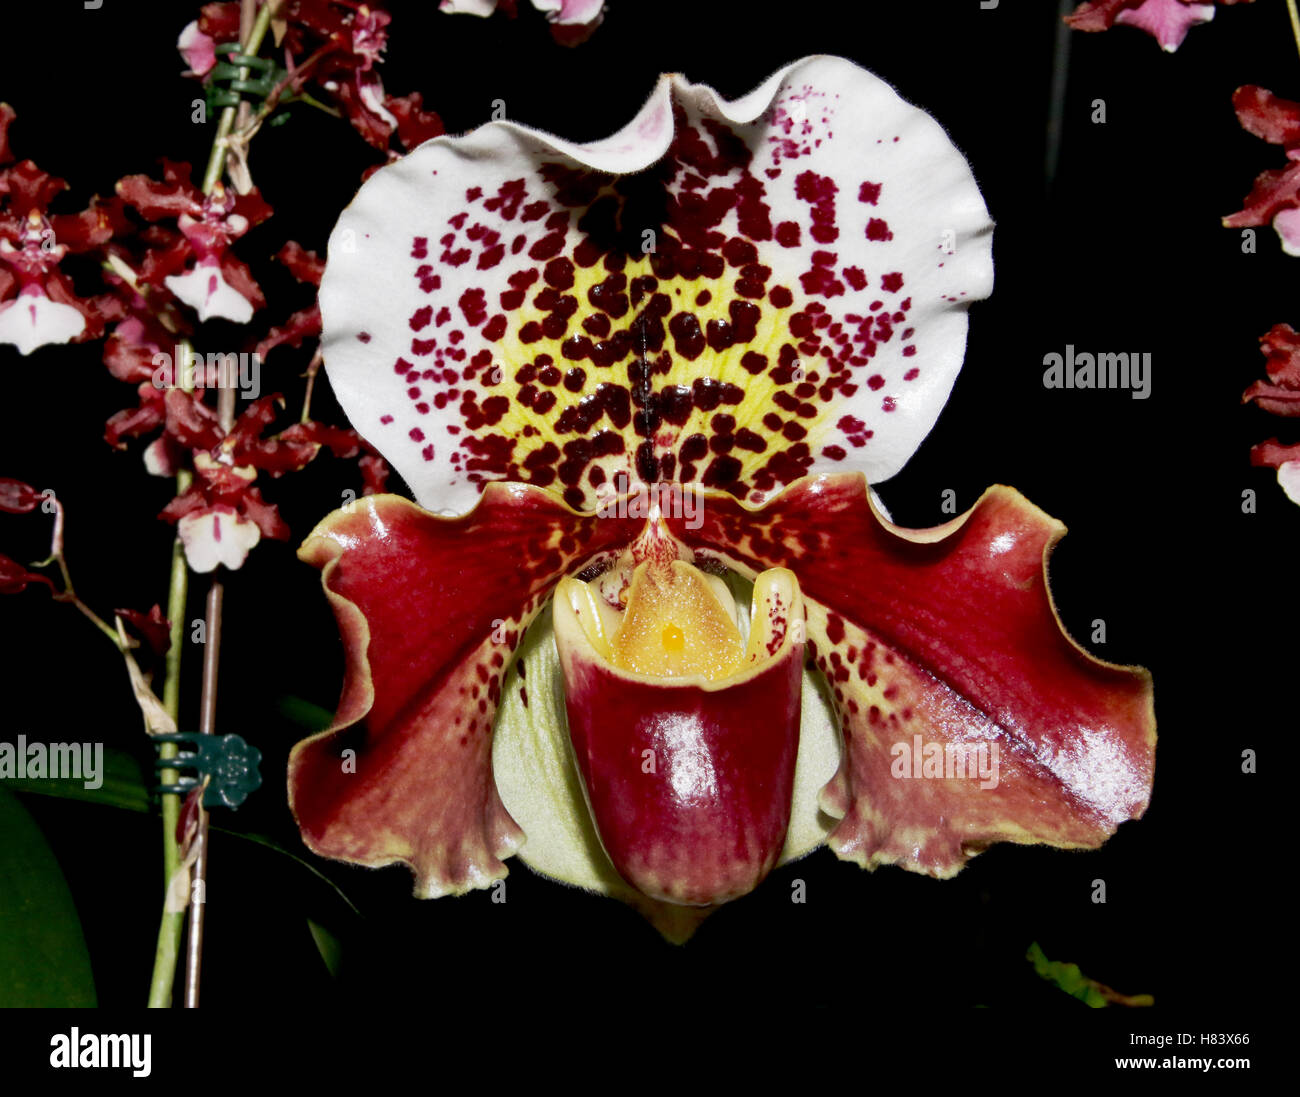 Lady Slipper Orchid. Lady’s Slipper Orchid. Paphiopedilum Spotted World x Mem Heinrich Duerbush. Orchid flower show. By the Miam Stock Photo